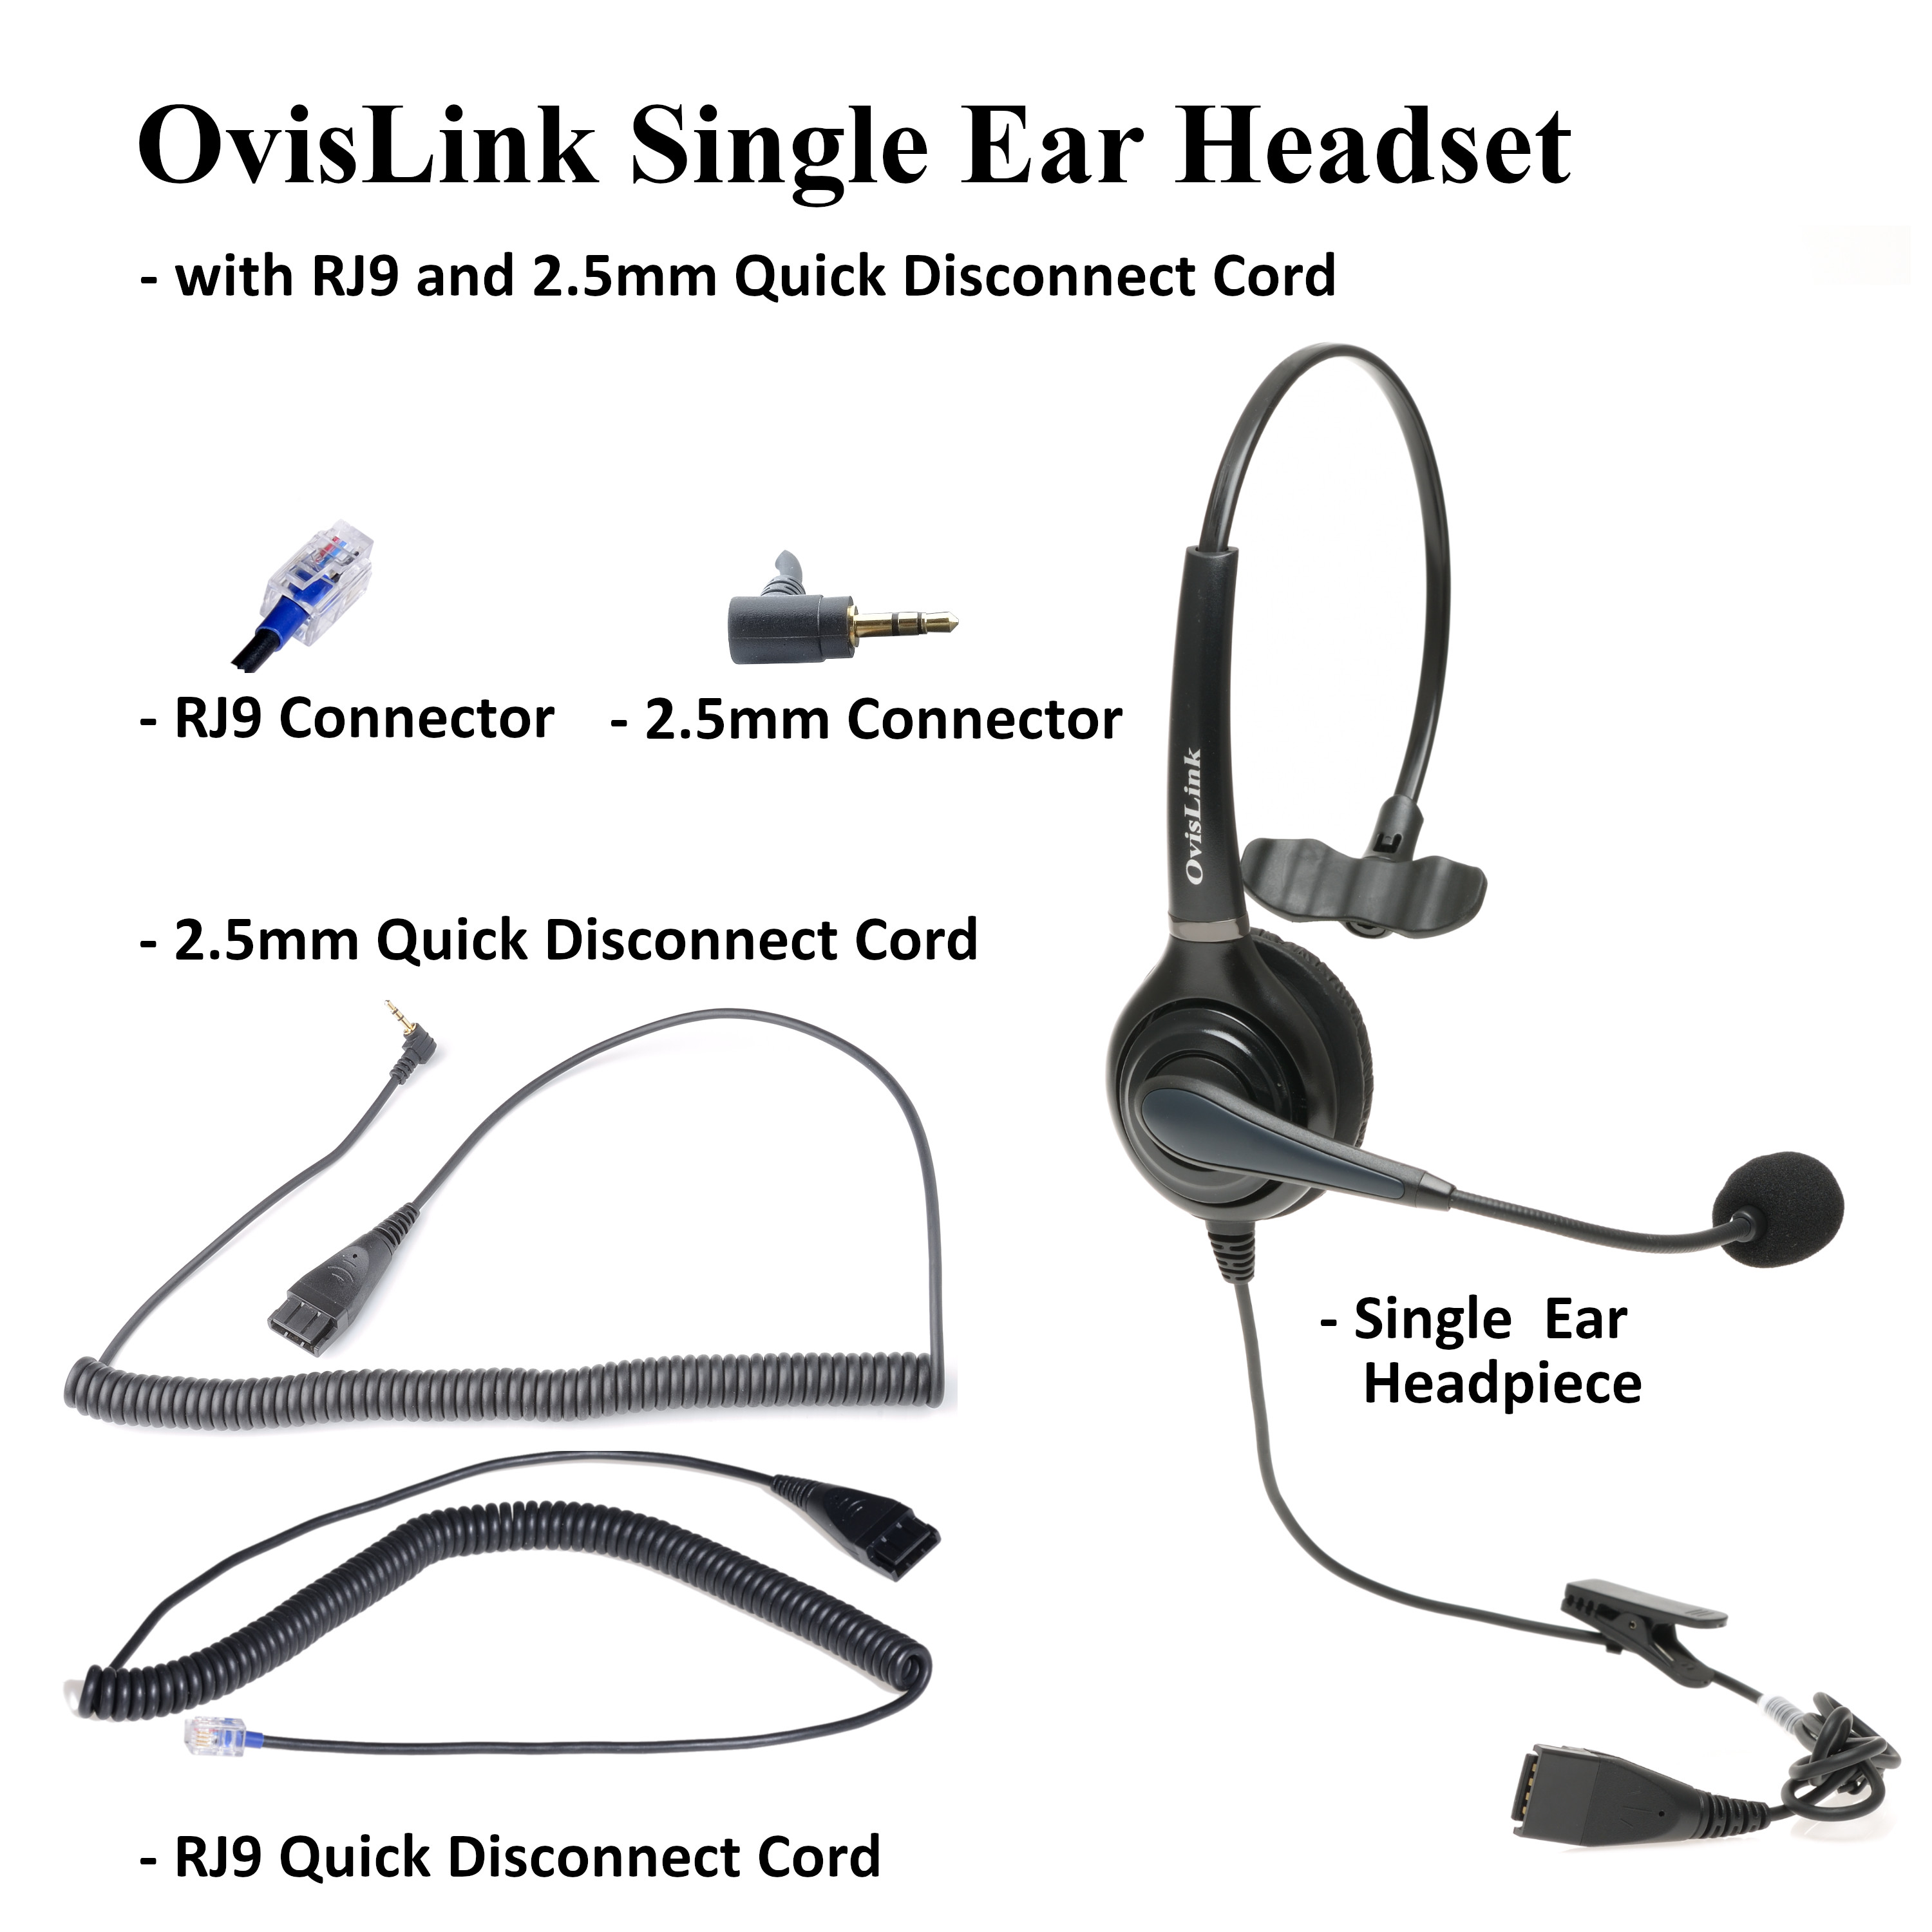 OvisLink Single Ear Headset with RJ9 and 2.5mm Quick Disconnct Cord